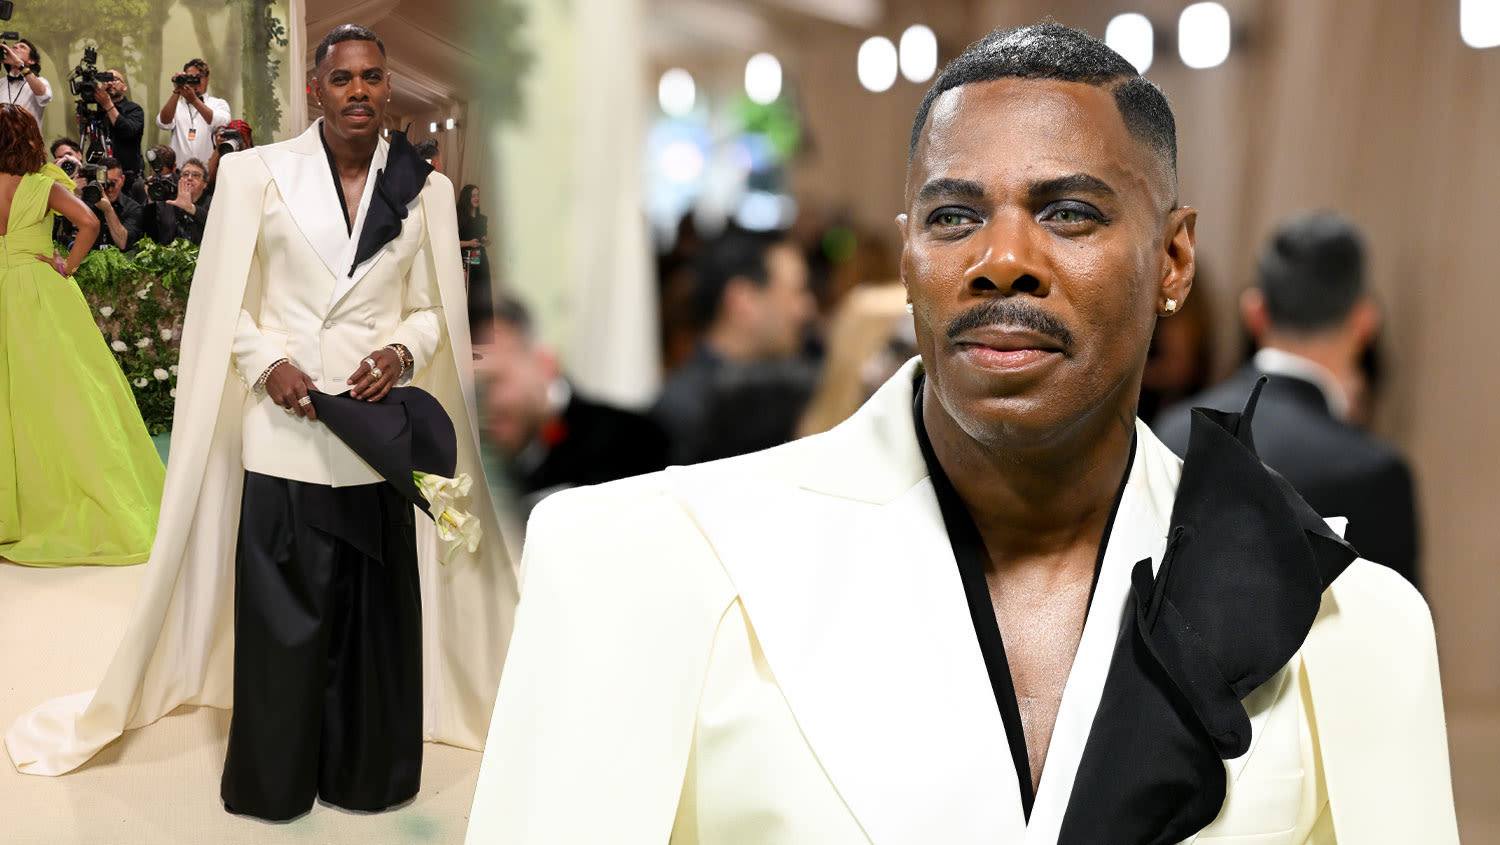 Colman Domingo Pays Tribute To The Late Chadwick Boseman & André Leon Talley With Met Gala Look